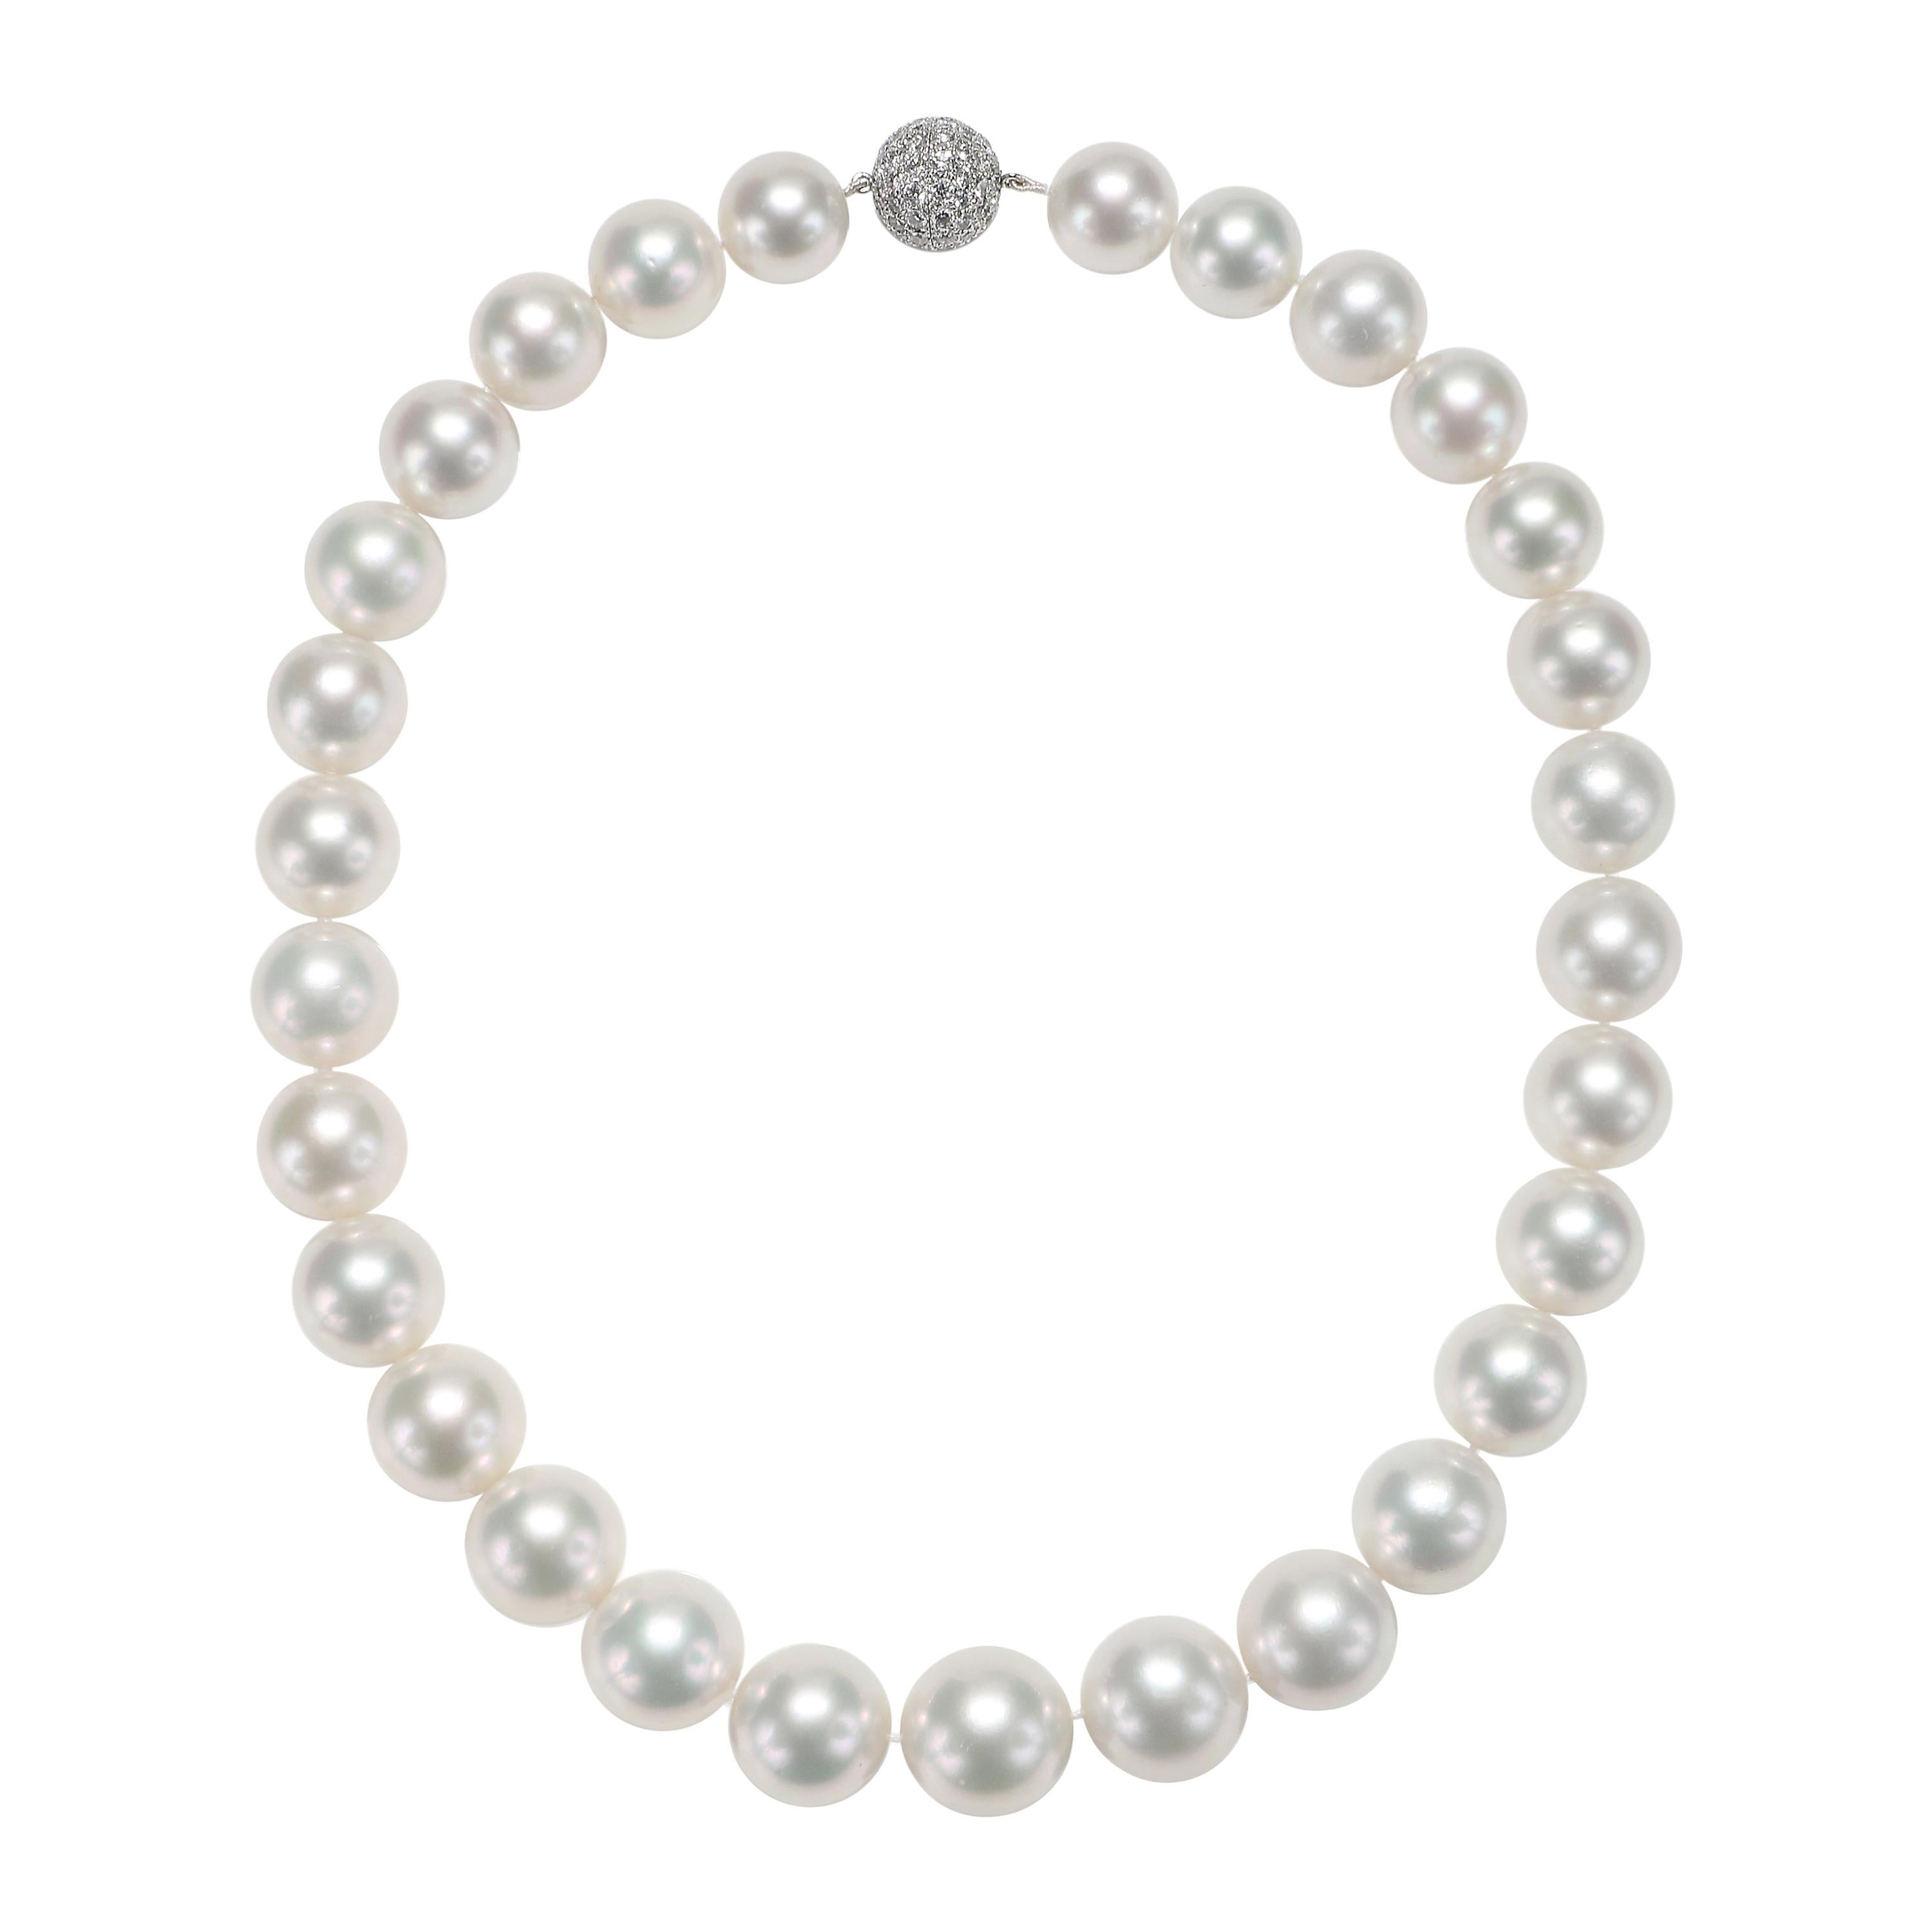 White South Sea Pearl Necklace with 18 Karat White Gold Diamond Pave Clasp